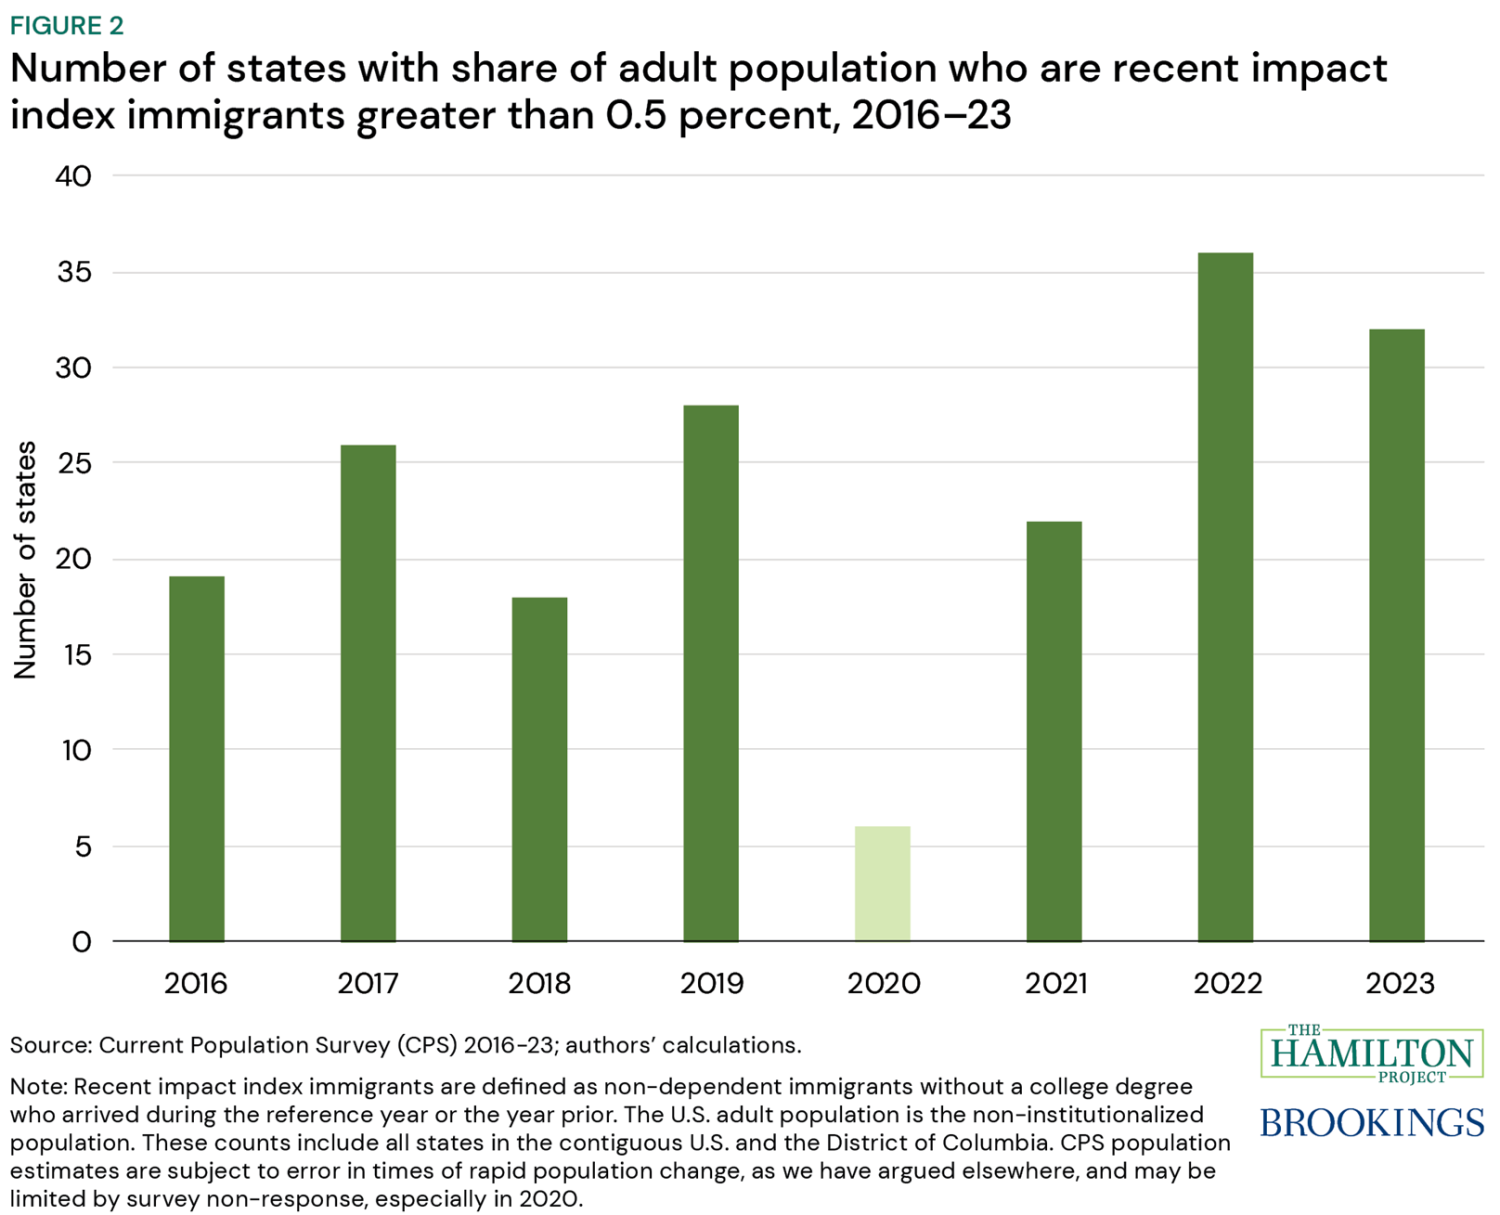 Figure 2: Number of states with share of adult population who are recent impact index immigrants greater than 0.5 percent, 2016-2023. The number of states with significant shares of recent impact index immigrants also increased: Between 2018 and 2023, the number of states with a share of recent impact index immigrants greater than 0.5 percent of the adult population rose by 14 states.